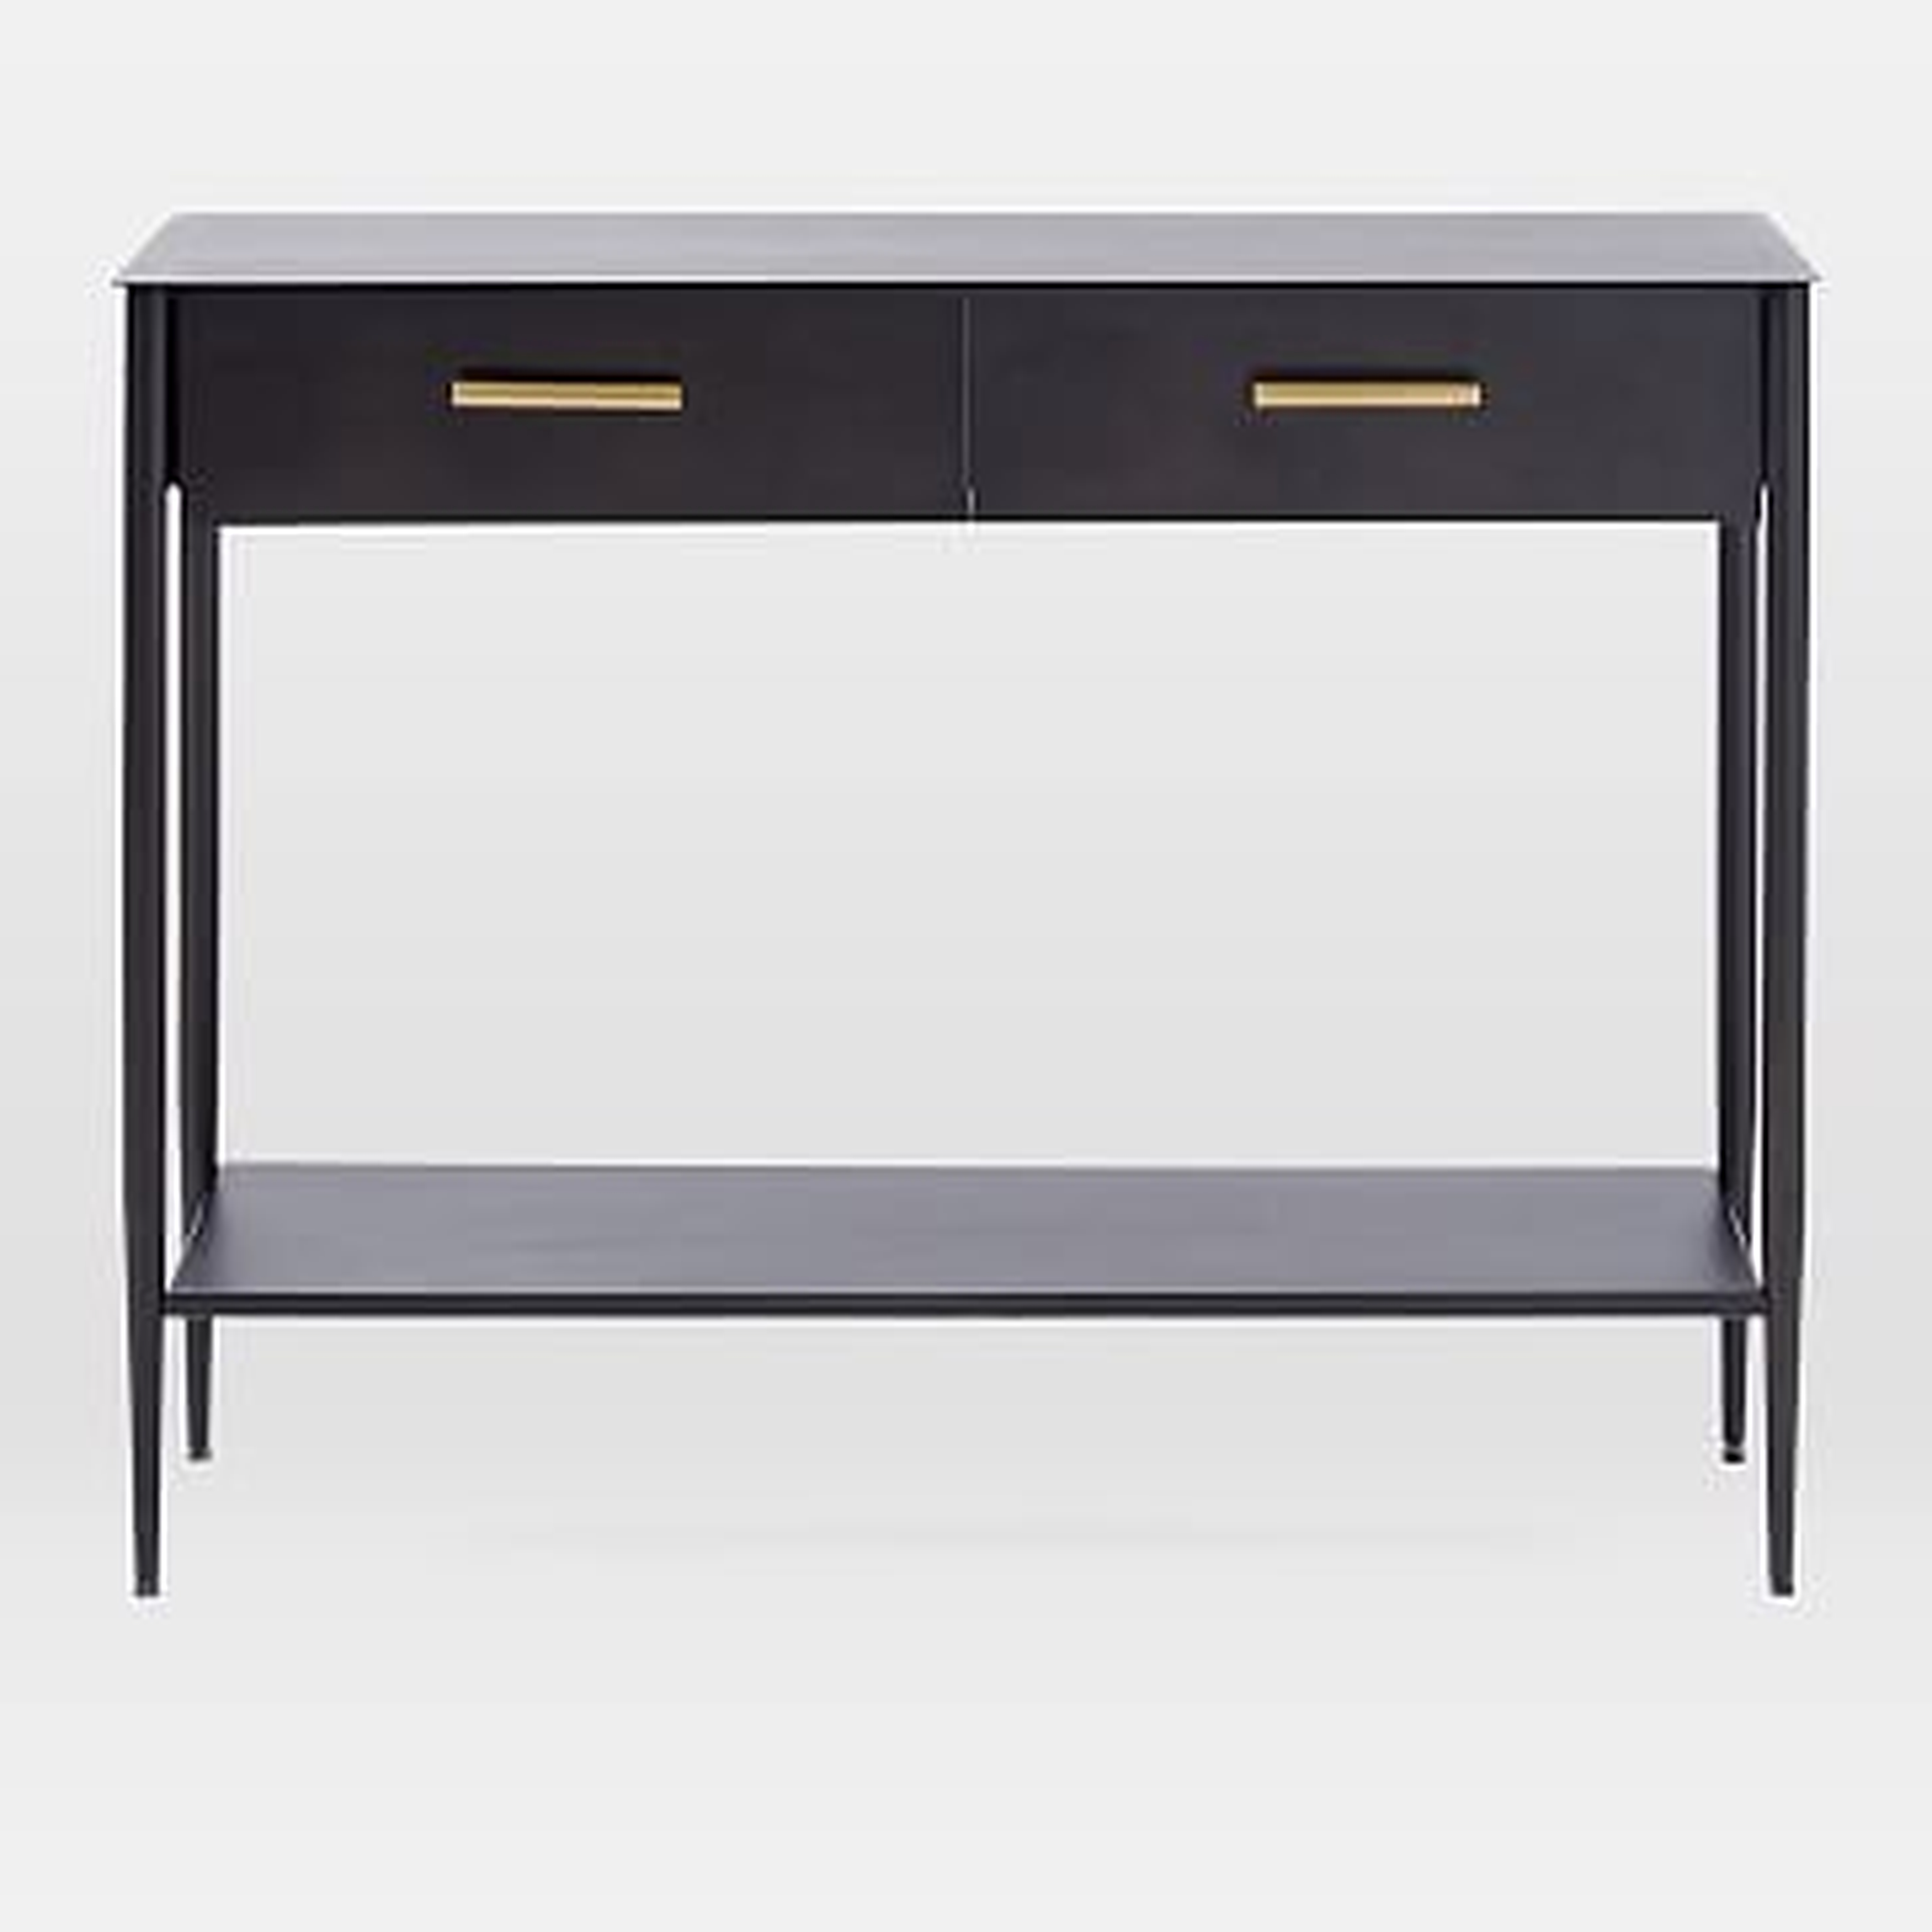 Metalwork 42" Console, Hot Rolled Steel - West Elm